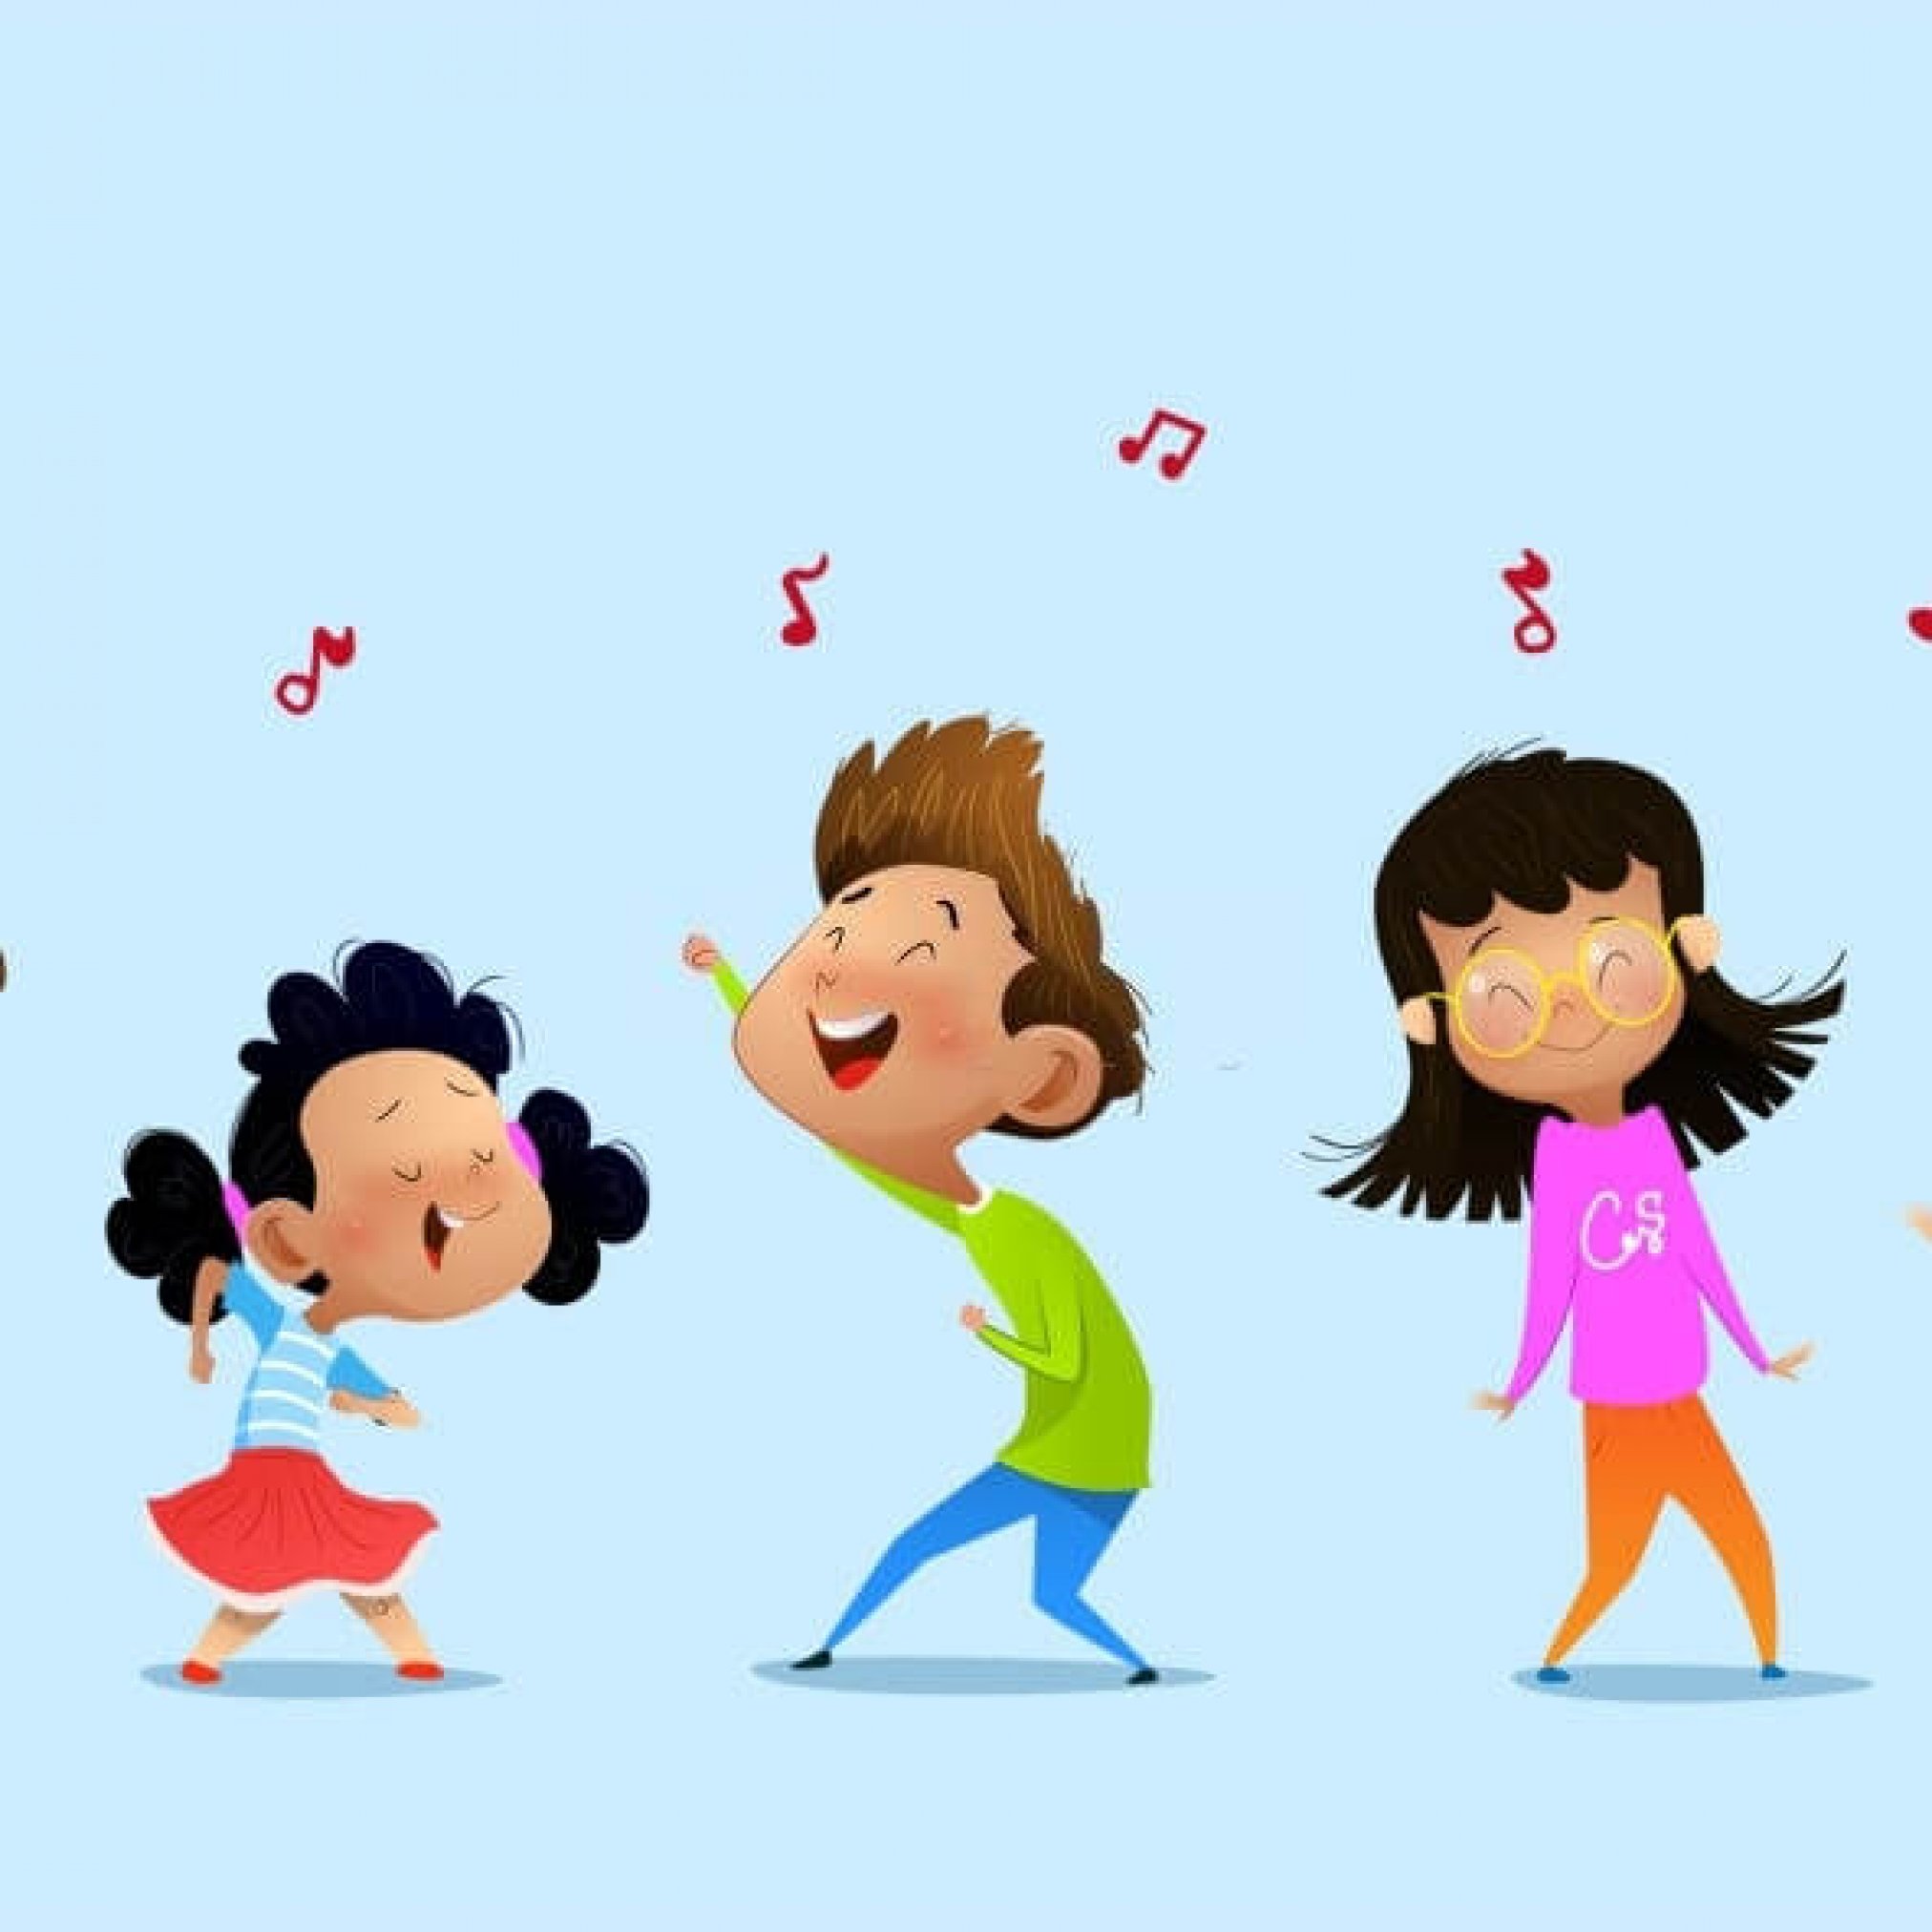 Dancing cartoon children. Vector illustrations Isolated on blue background